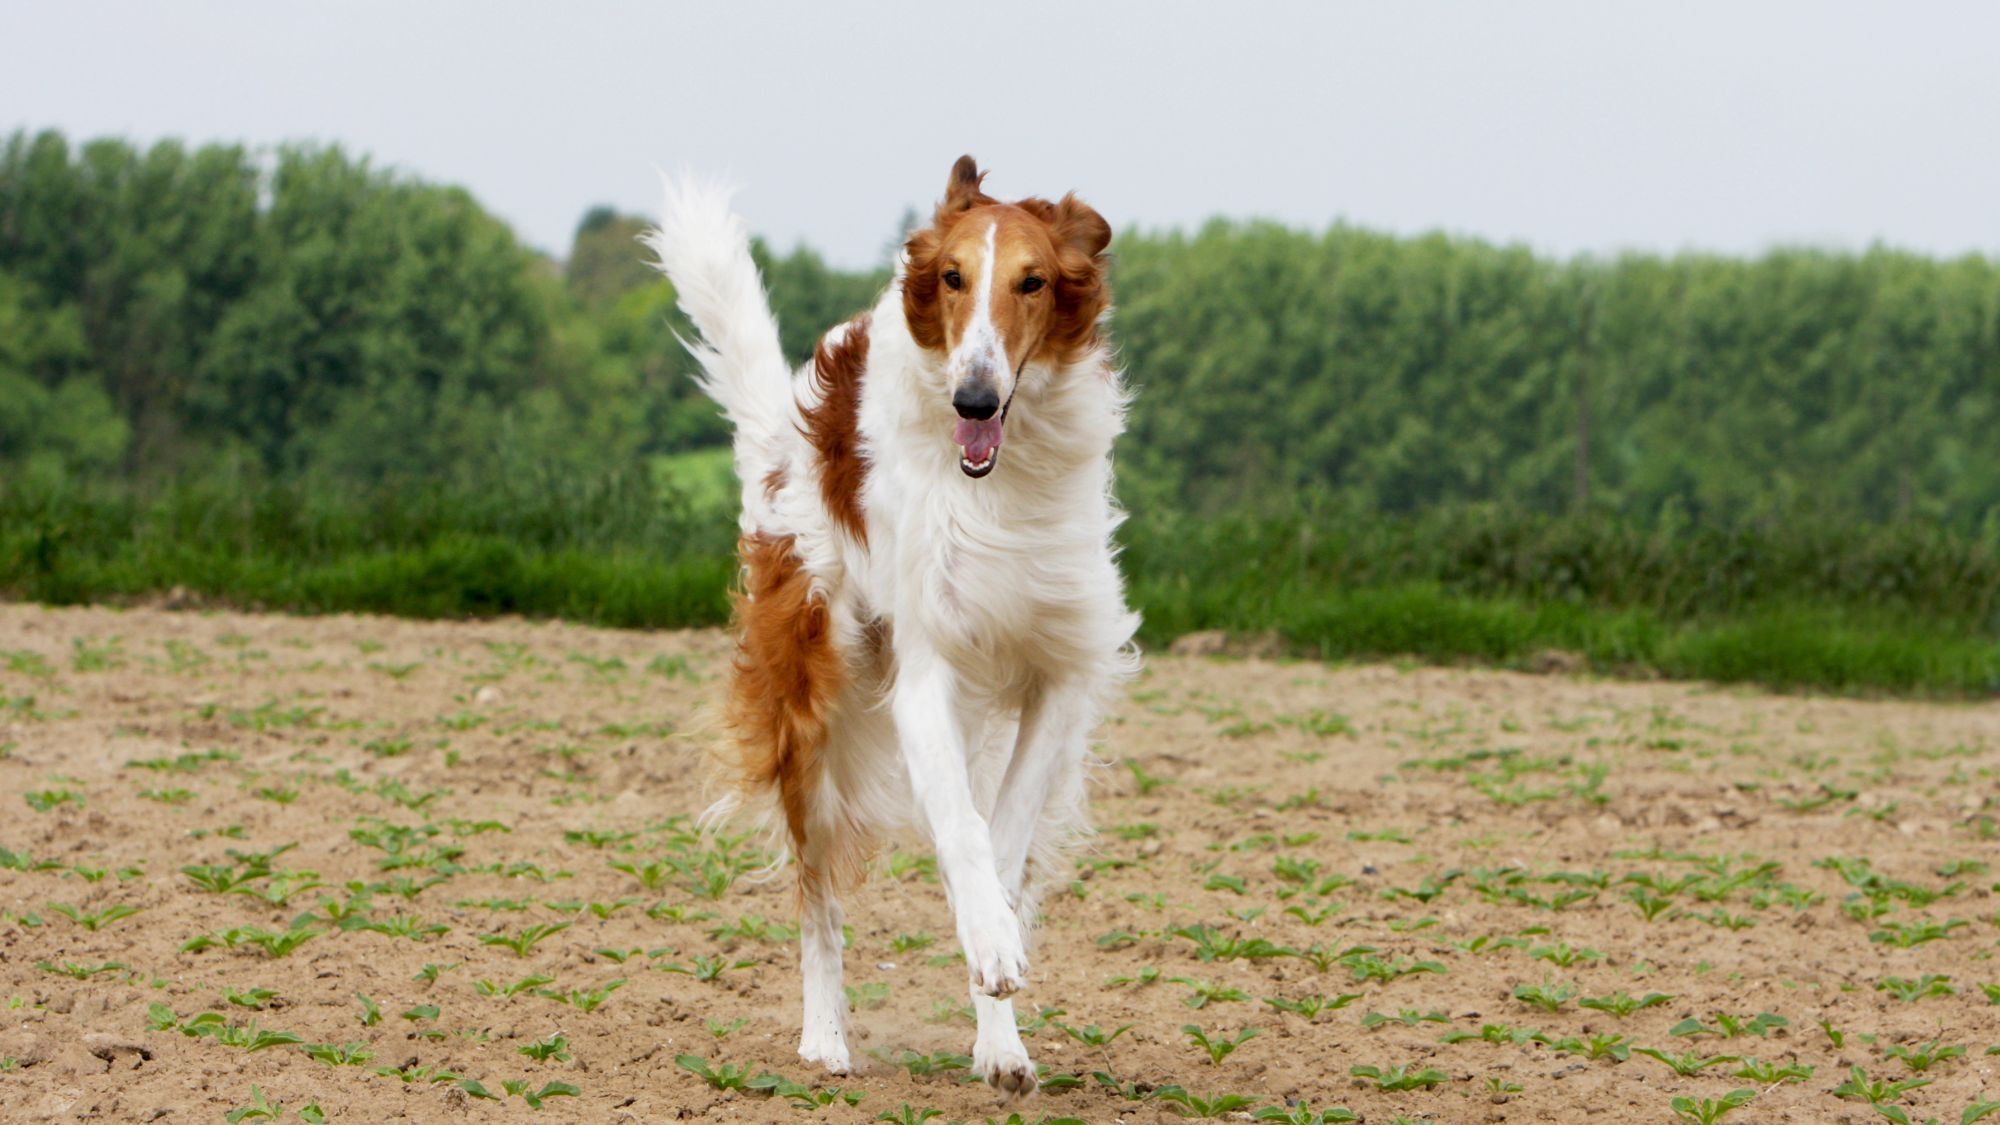 Borzoi running towards the camera with its tongue out